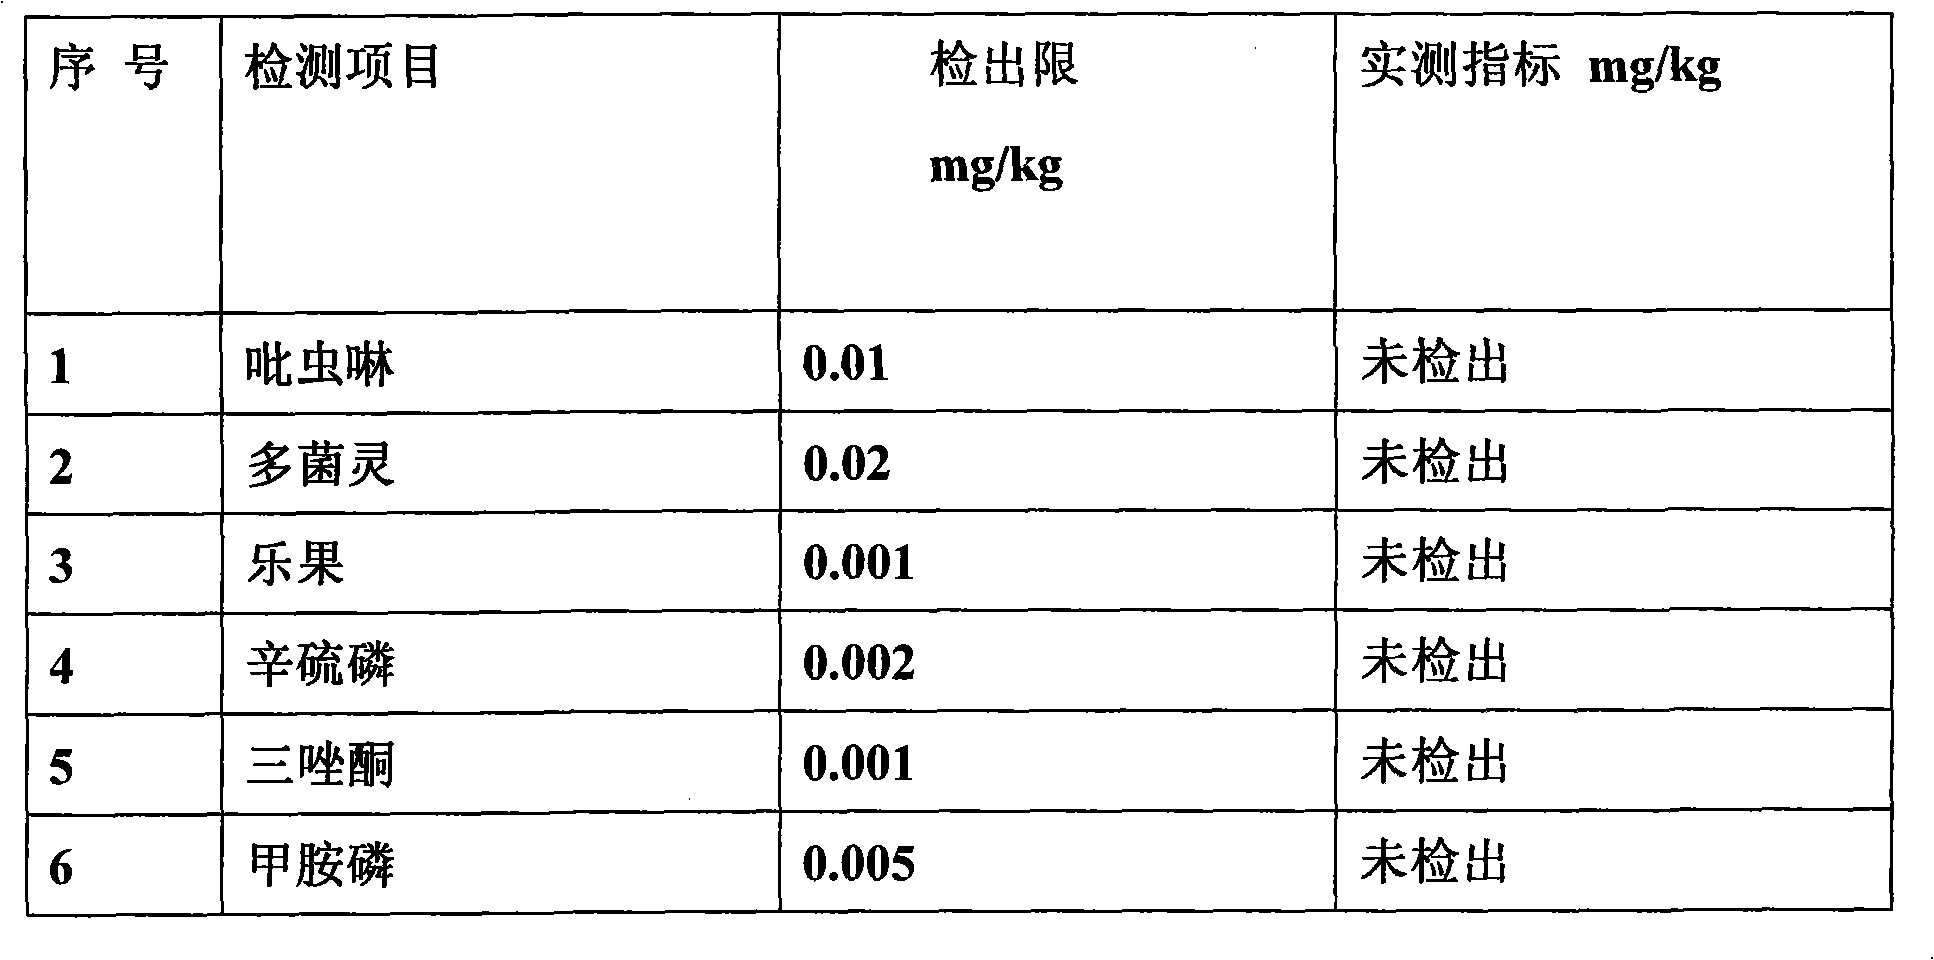 Method for culturing organic Chinese chives